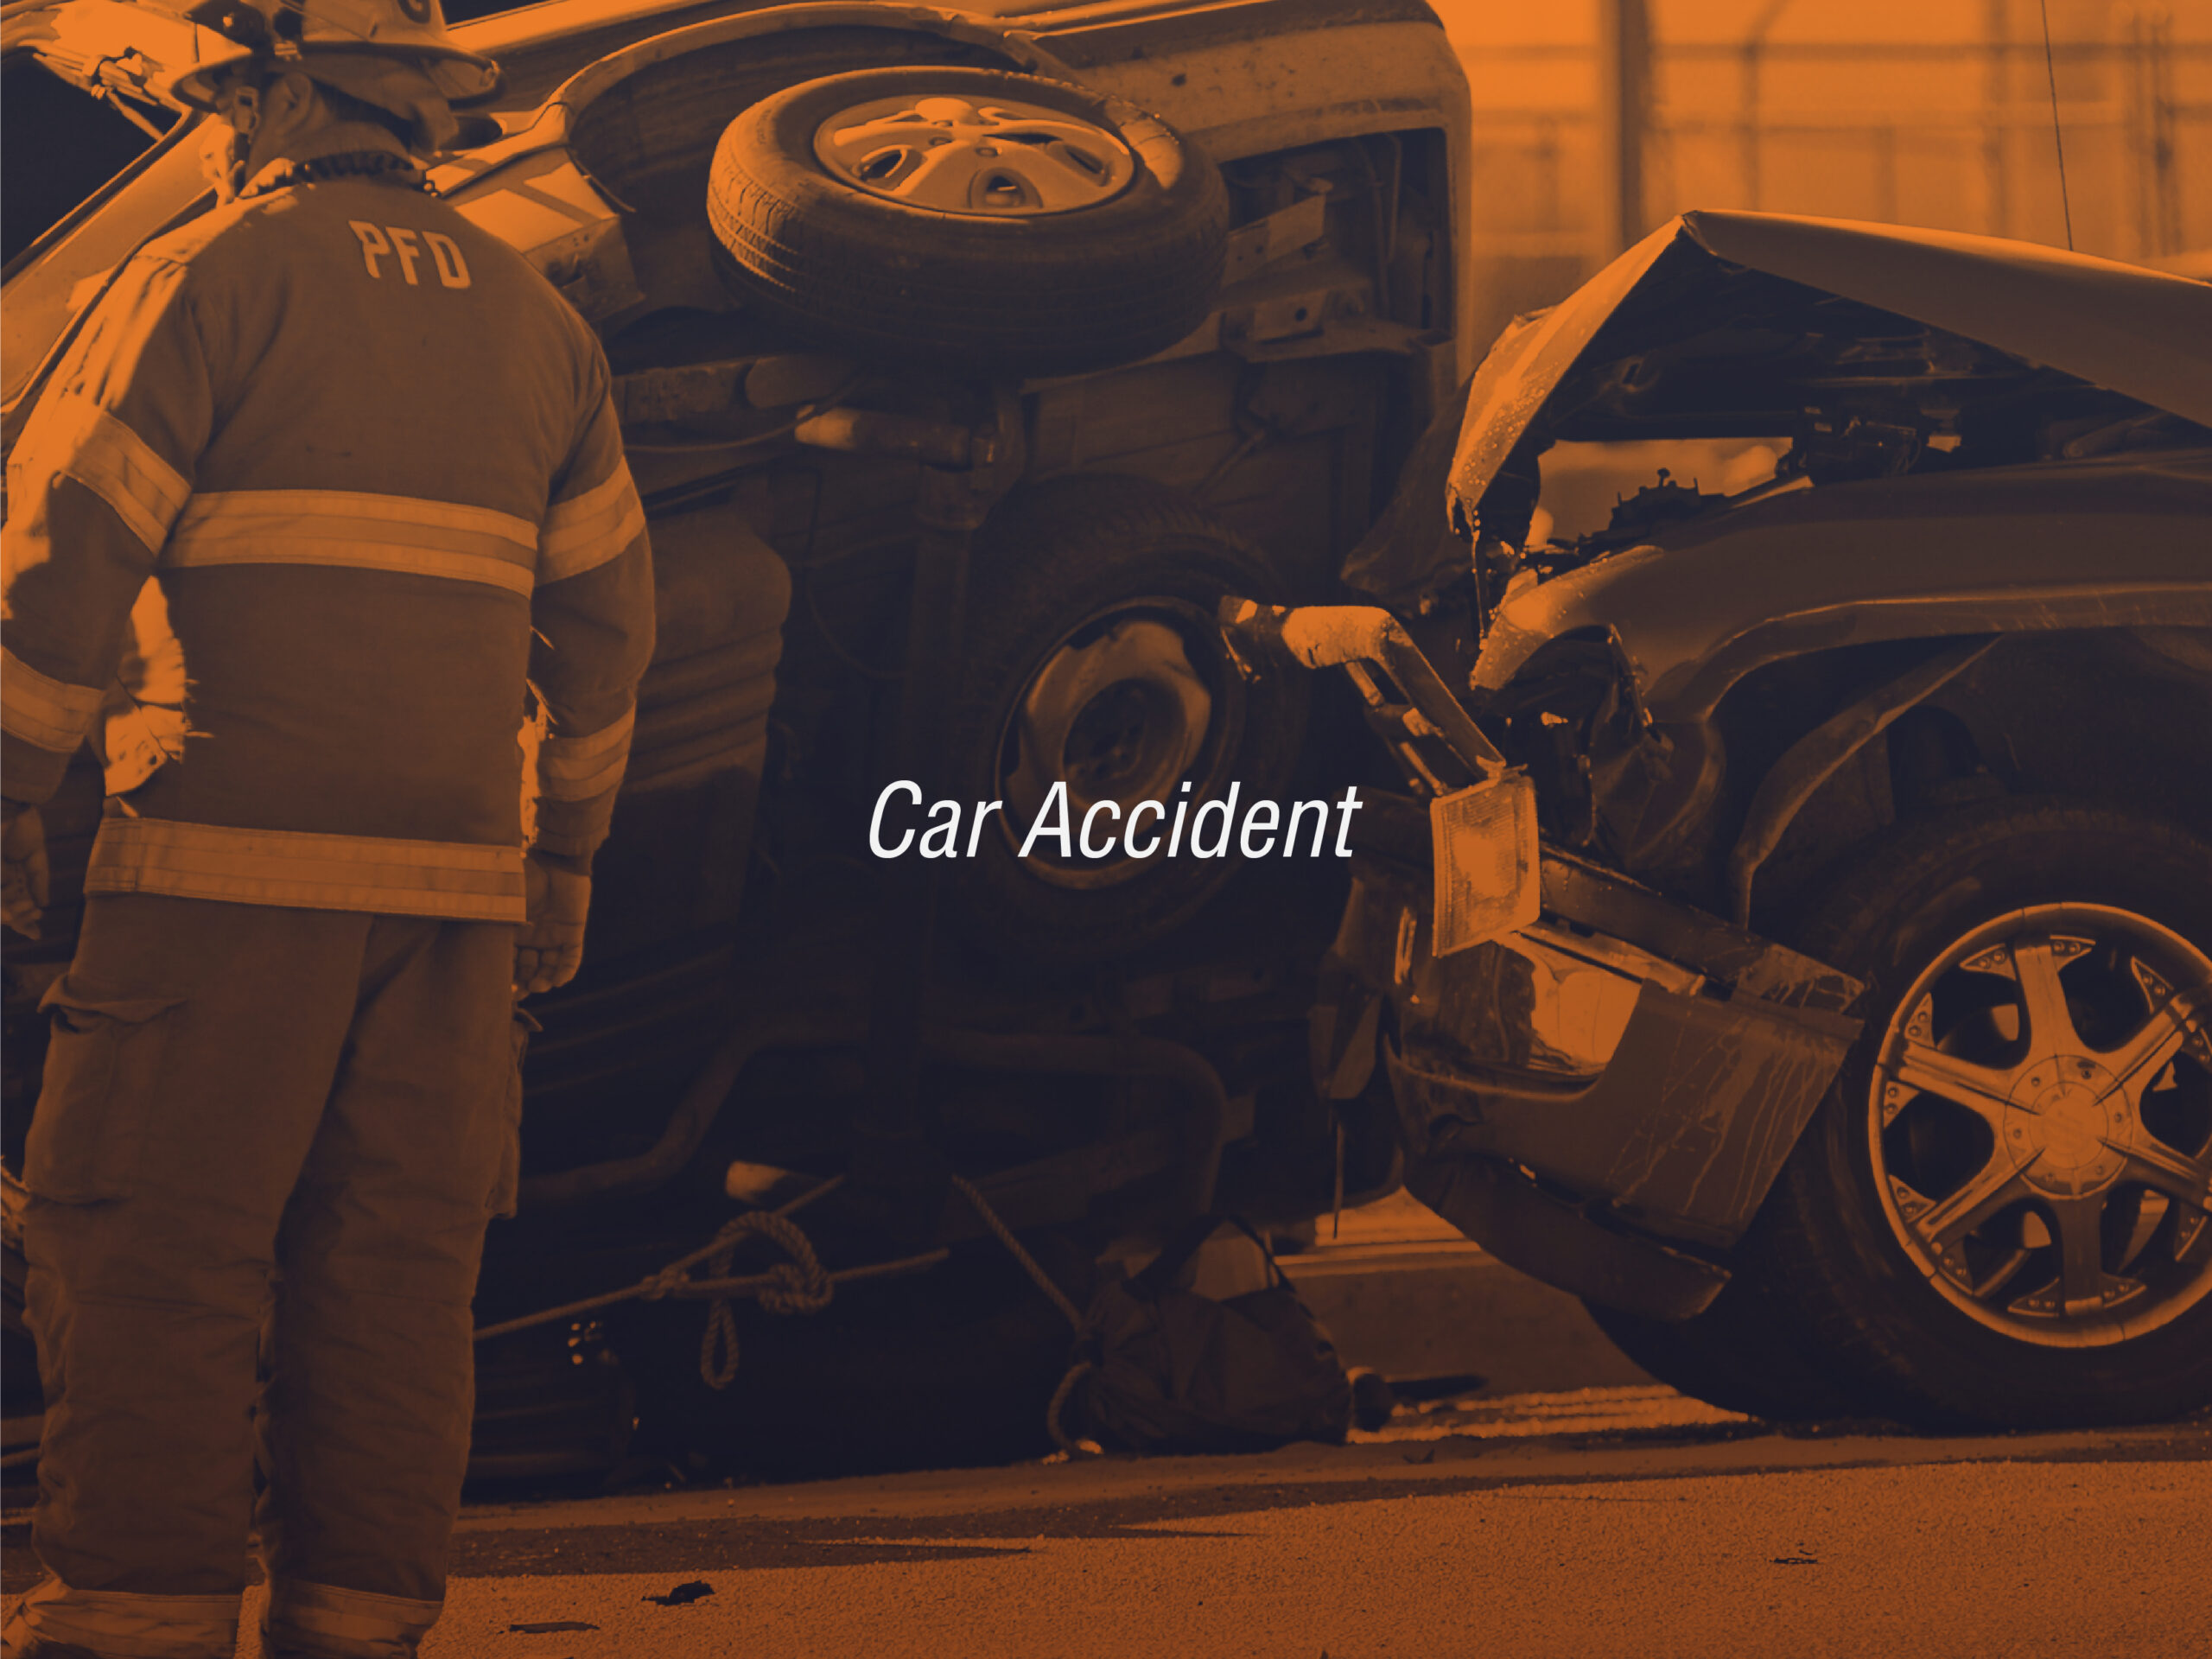 Steps to take after a California car accident